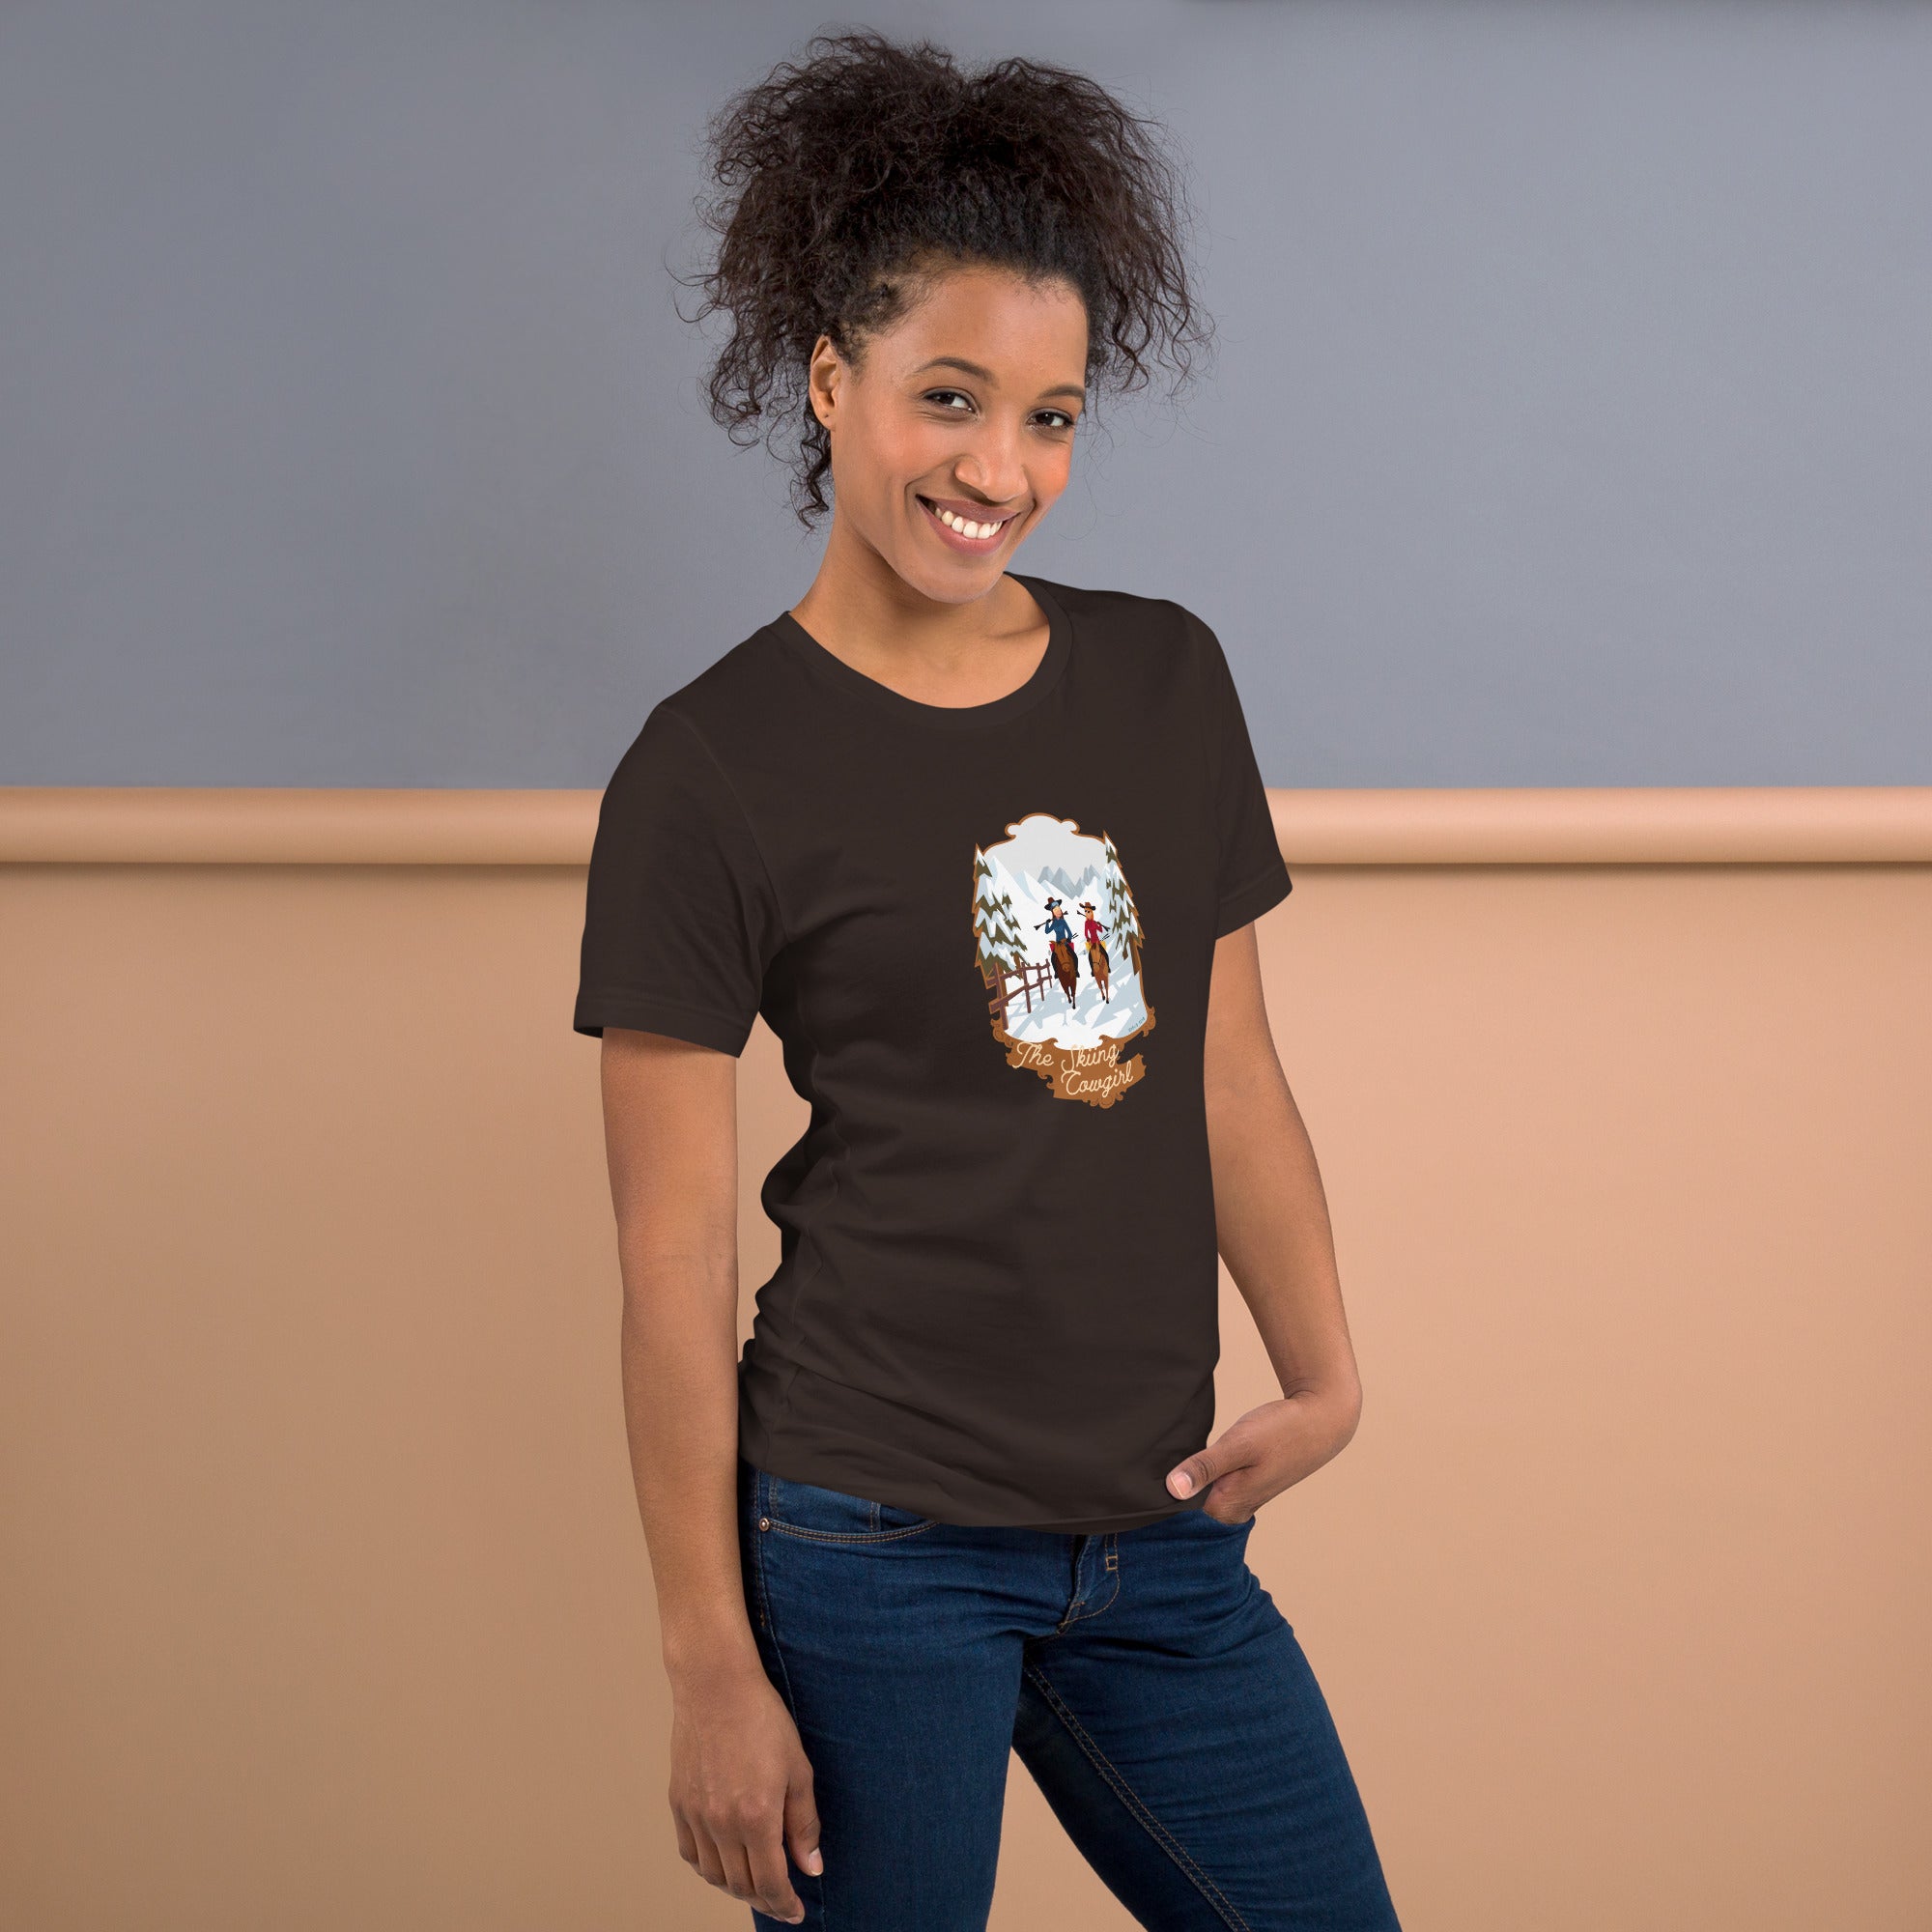 Unisex cotton t-shirt The Skiing Cowgirl on dark colors